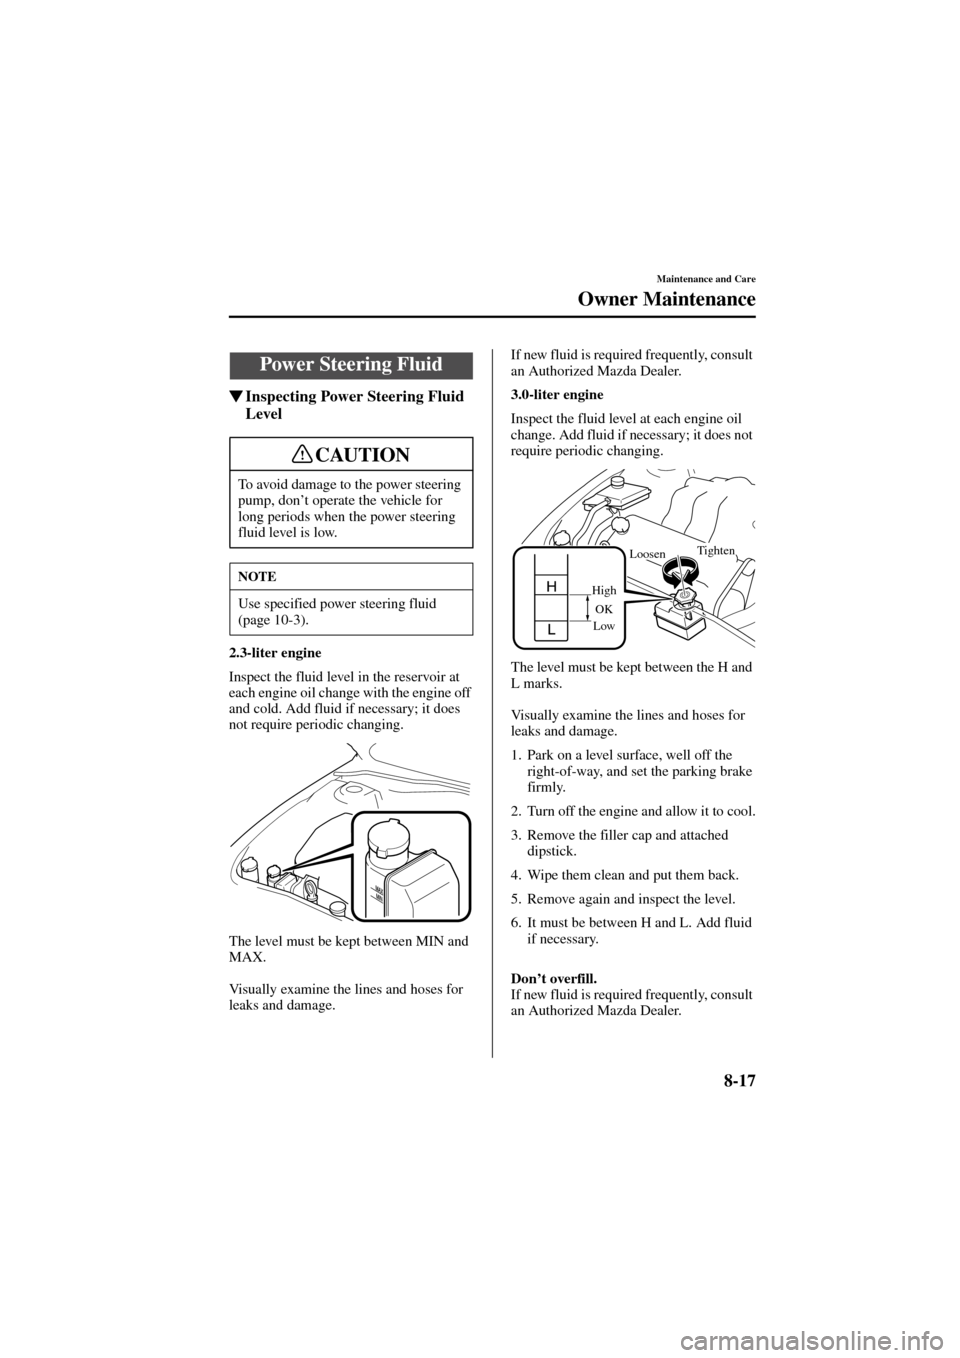 MAZDA MODEL 6 2004   (in English) Owners Manual 8-17
Maintenance and Care
Owner Maintenance
Form No. 8R29-EA-02I
Inspecting Power Steering Fluid 
Level
2.3-liter engine
Inspect the fluid level in the reservoir at 
each engine oil change with the e